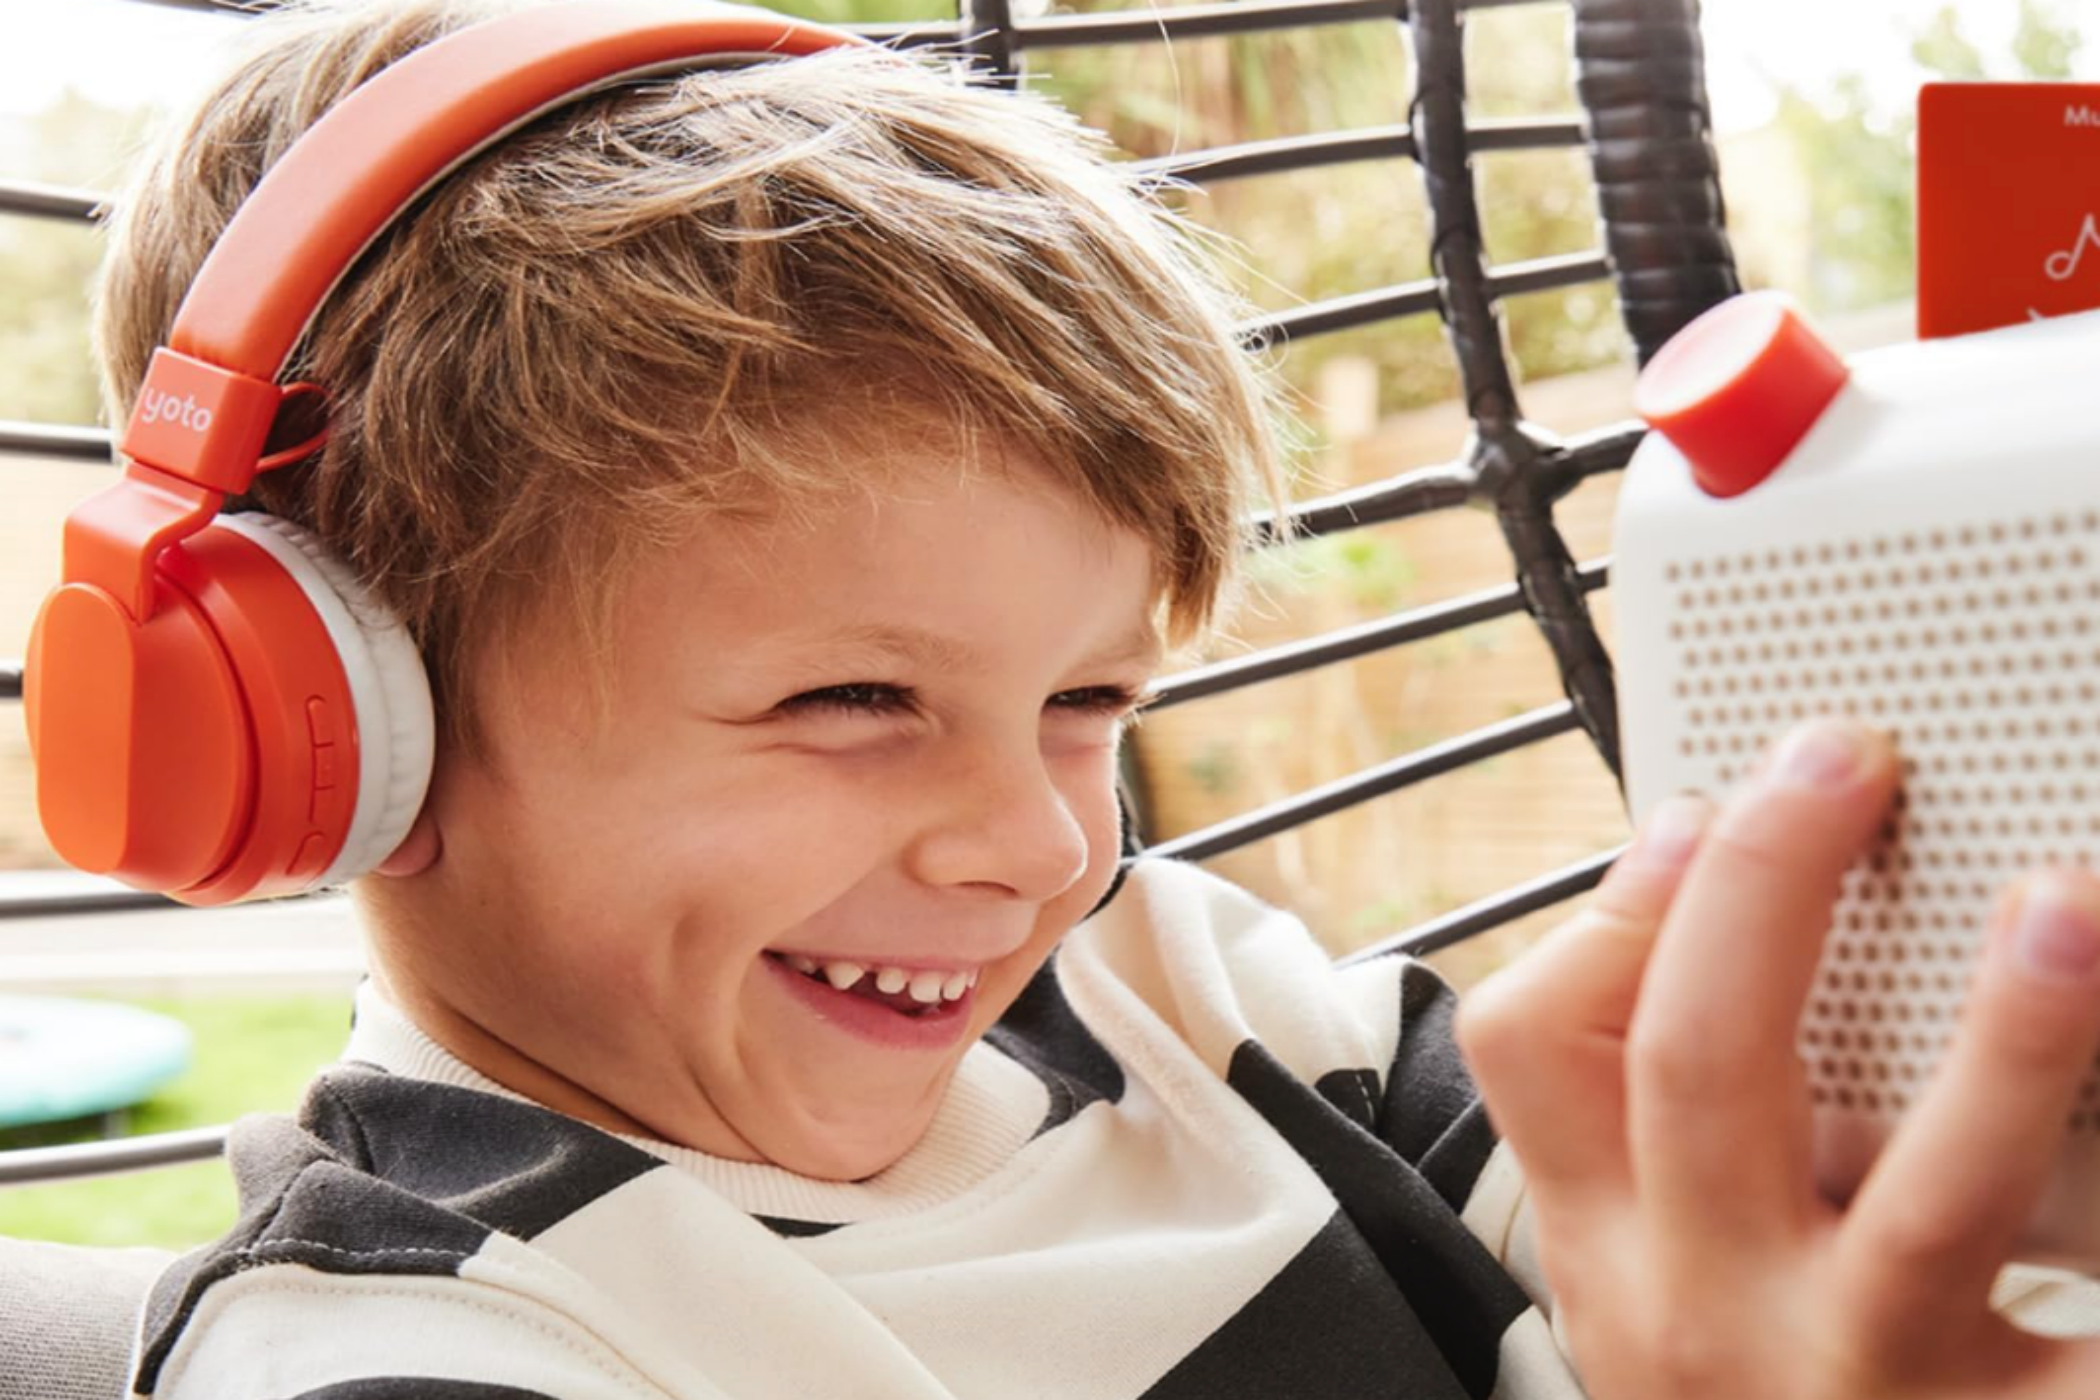 A boy laughing while listening to Yoto Player (3rd generation) on headphones.